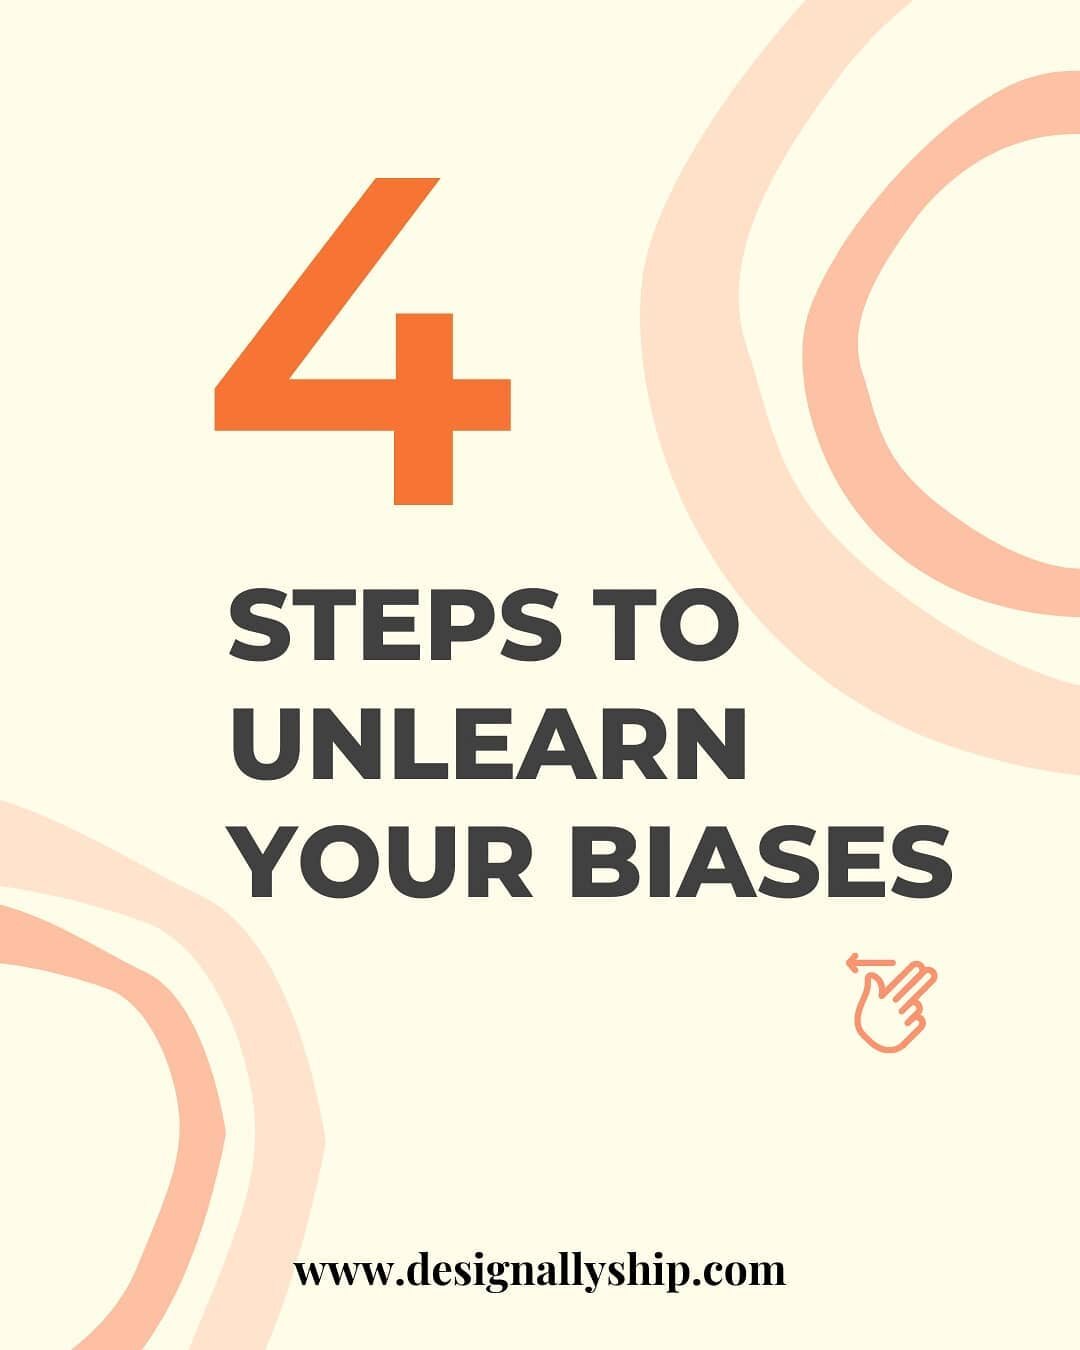 Everyone has implicit biases - that's part of being human! But have you taken a closer look at yours lately? Set aside some time to take the Harvard IAT implicit bias test and see if your biases are aligned with your beliefs. Not aligned? Then it's t